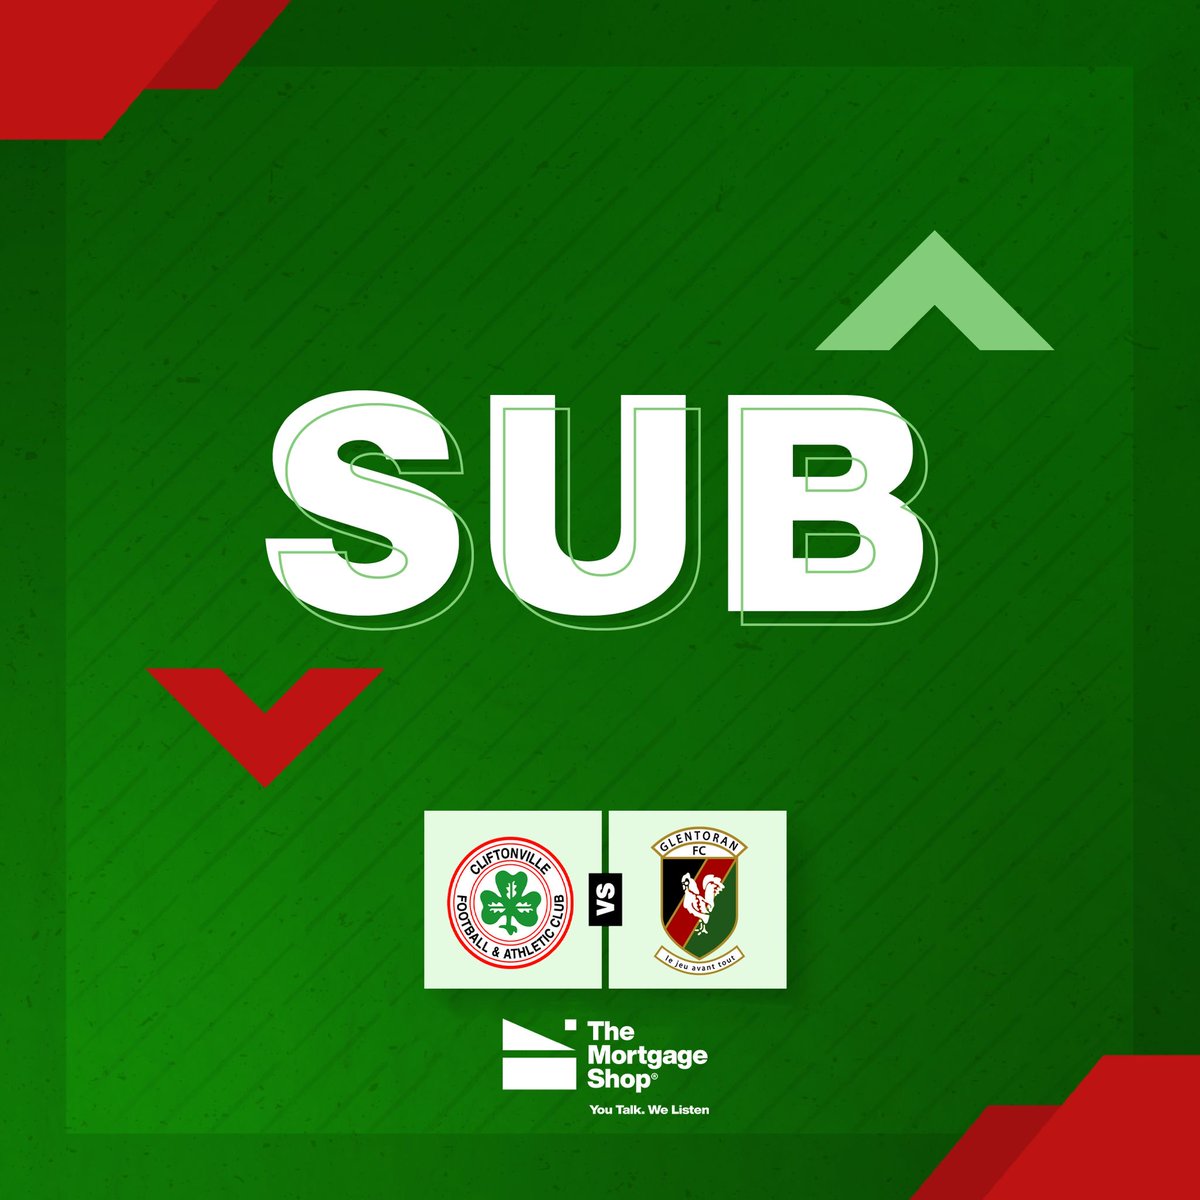 88’ Double Substitution - Keenan and Neill replace McMaster and Weir #CLIGLE #LeagueCup [3-2]